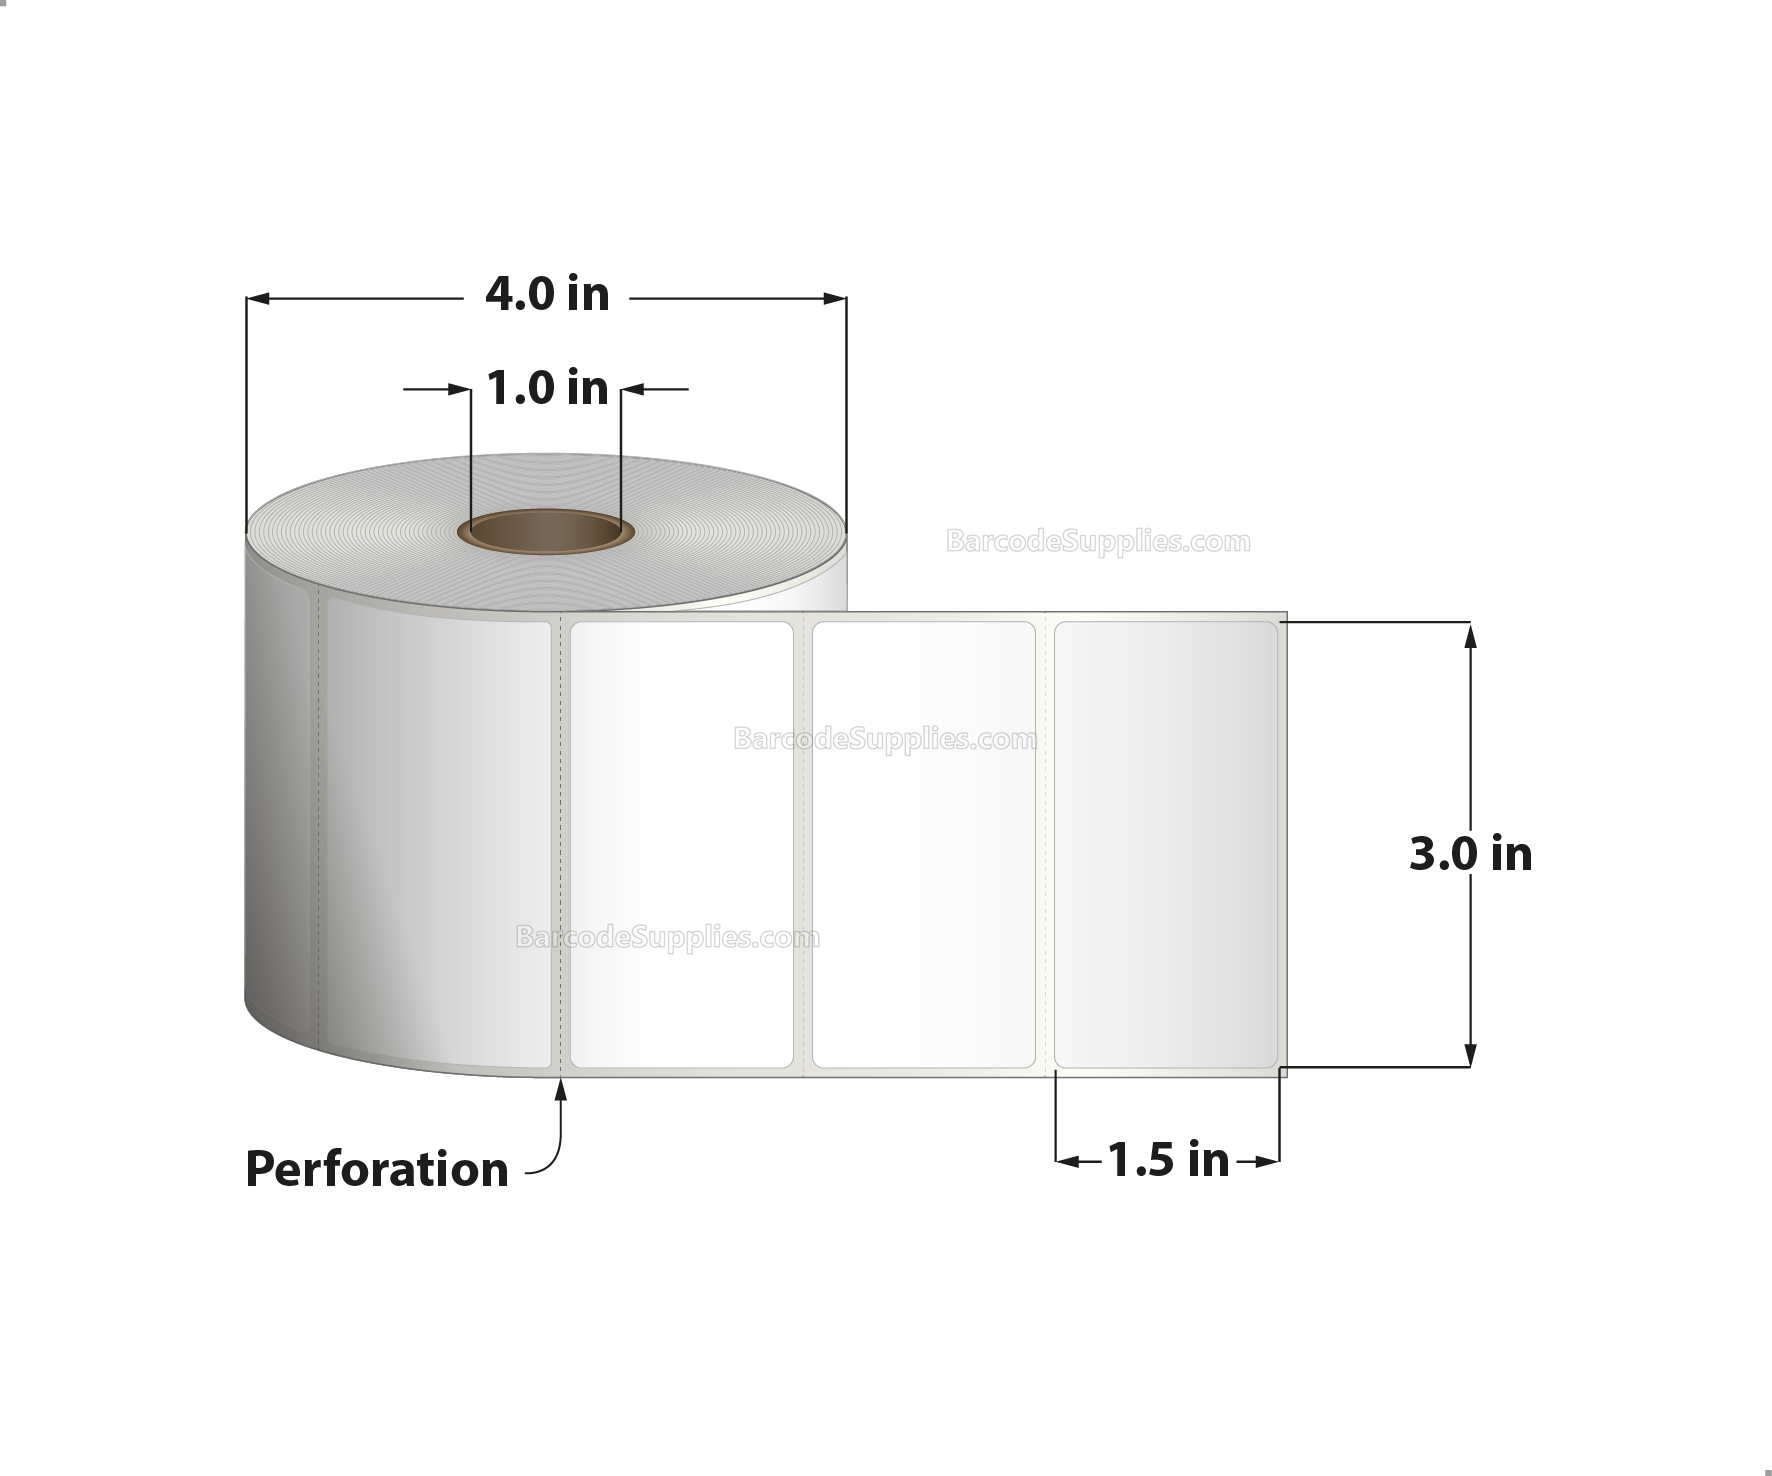 3 x 1.5 Direct Thermal White Labels With Acrylic Adhesive - Perforated - 960 Labels Per Roll - Carton Of 12 Rolls - 11520 Labels Total - MPN: RD-3-15-960-1